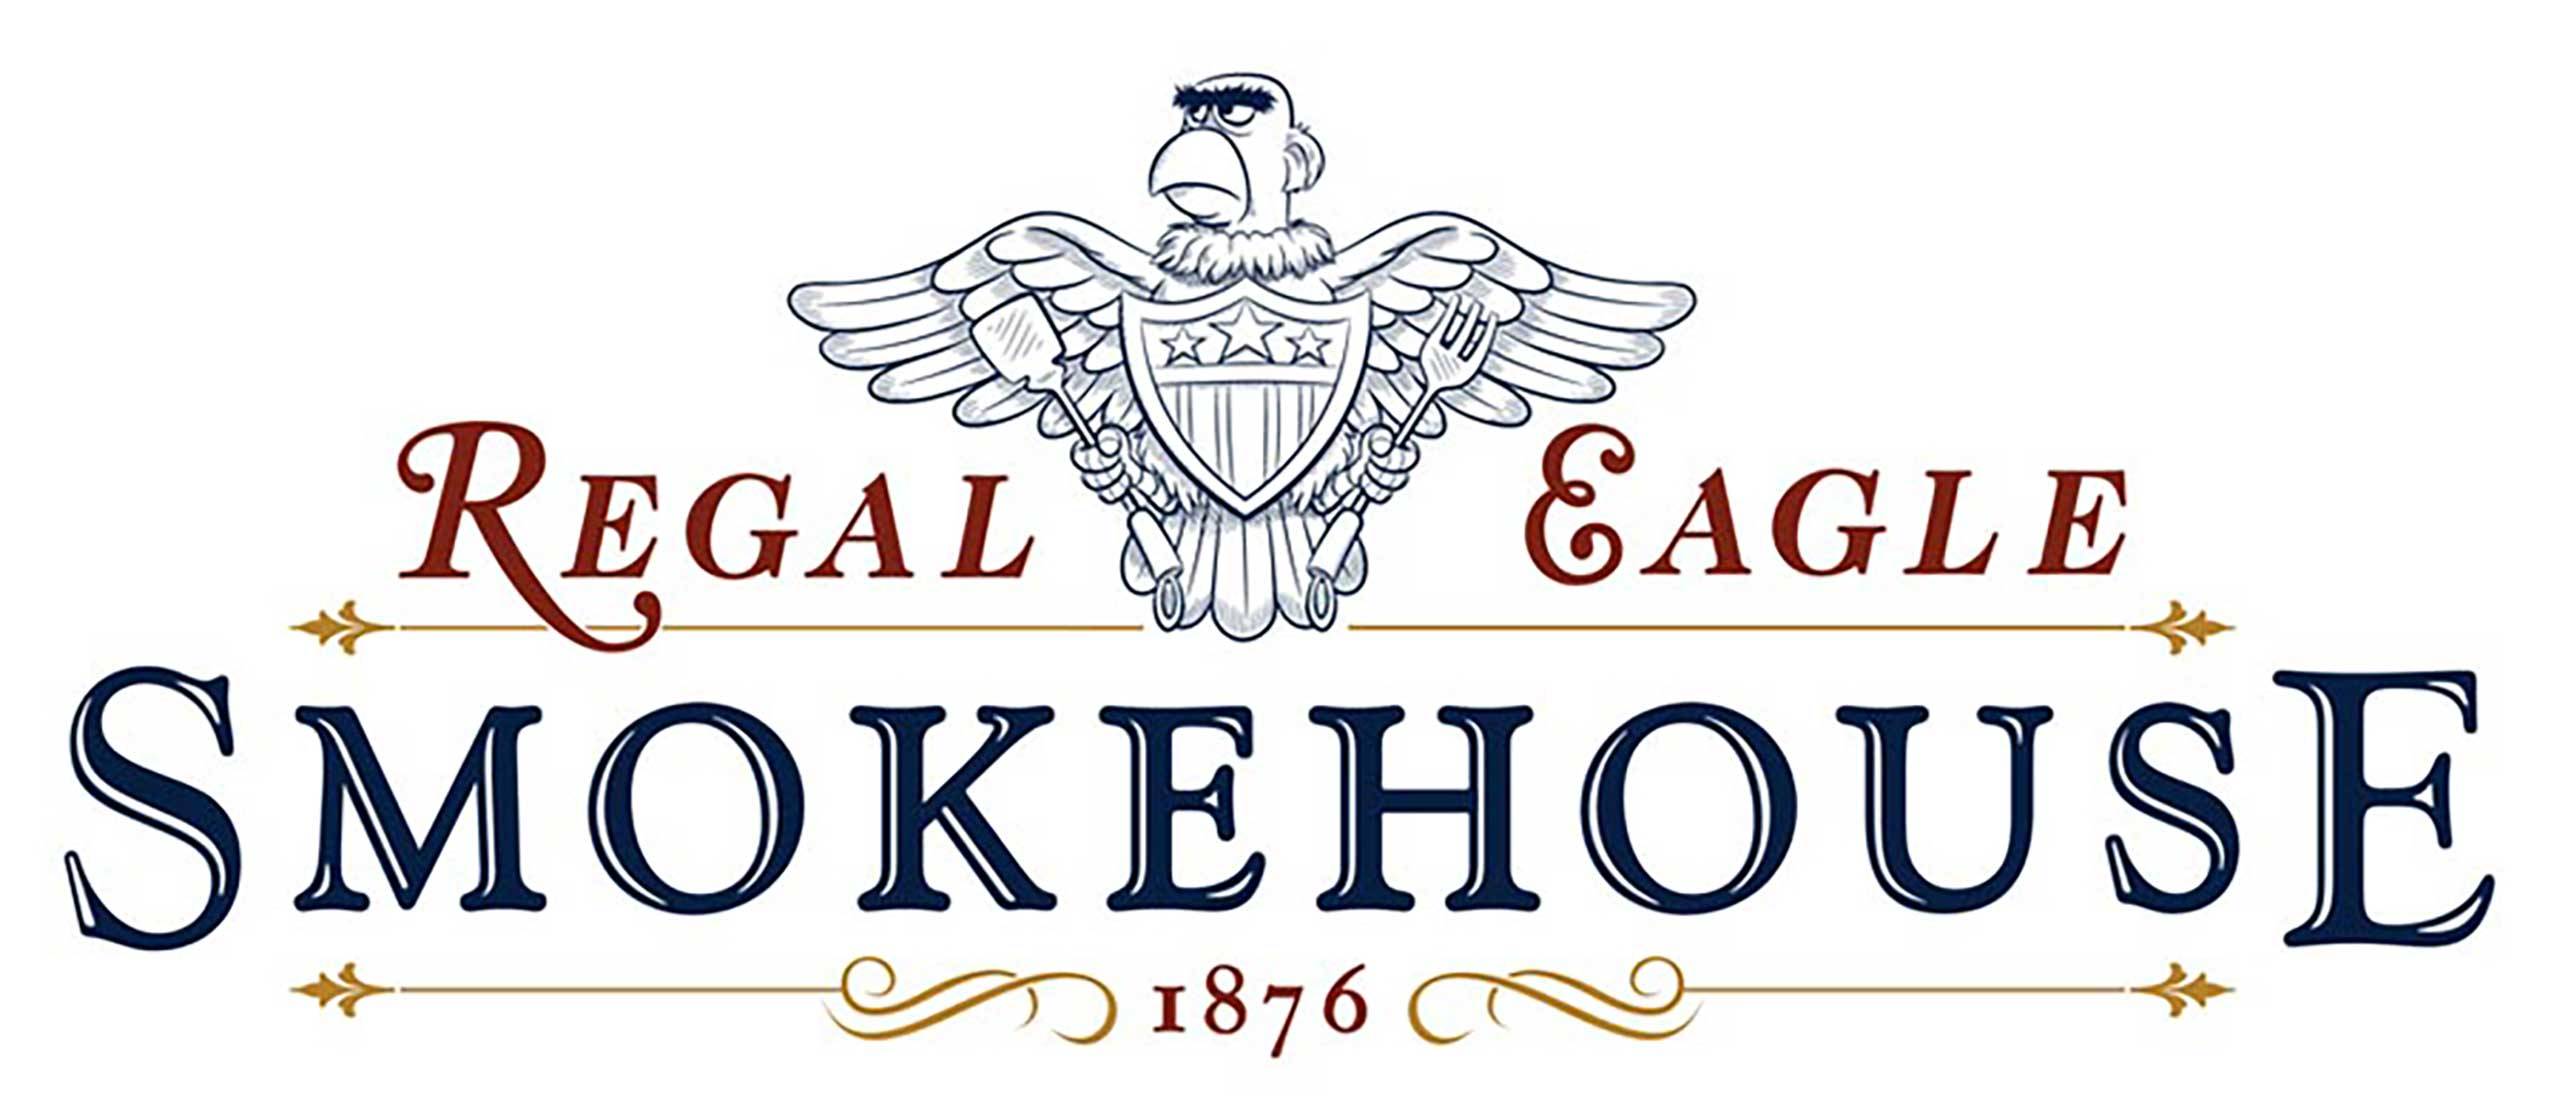 PHOTO - New concept art shows the upcoming Regal Eagle Smokehouse at Epcot